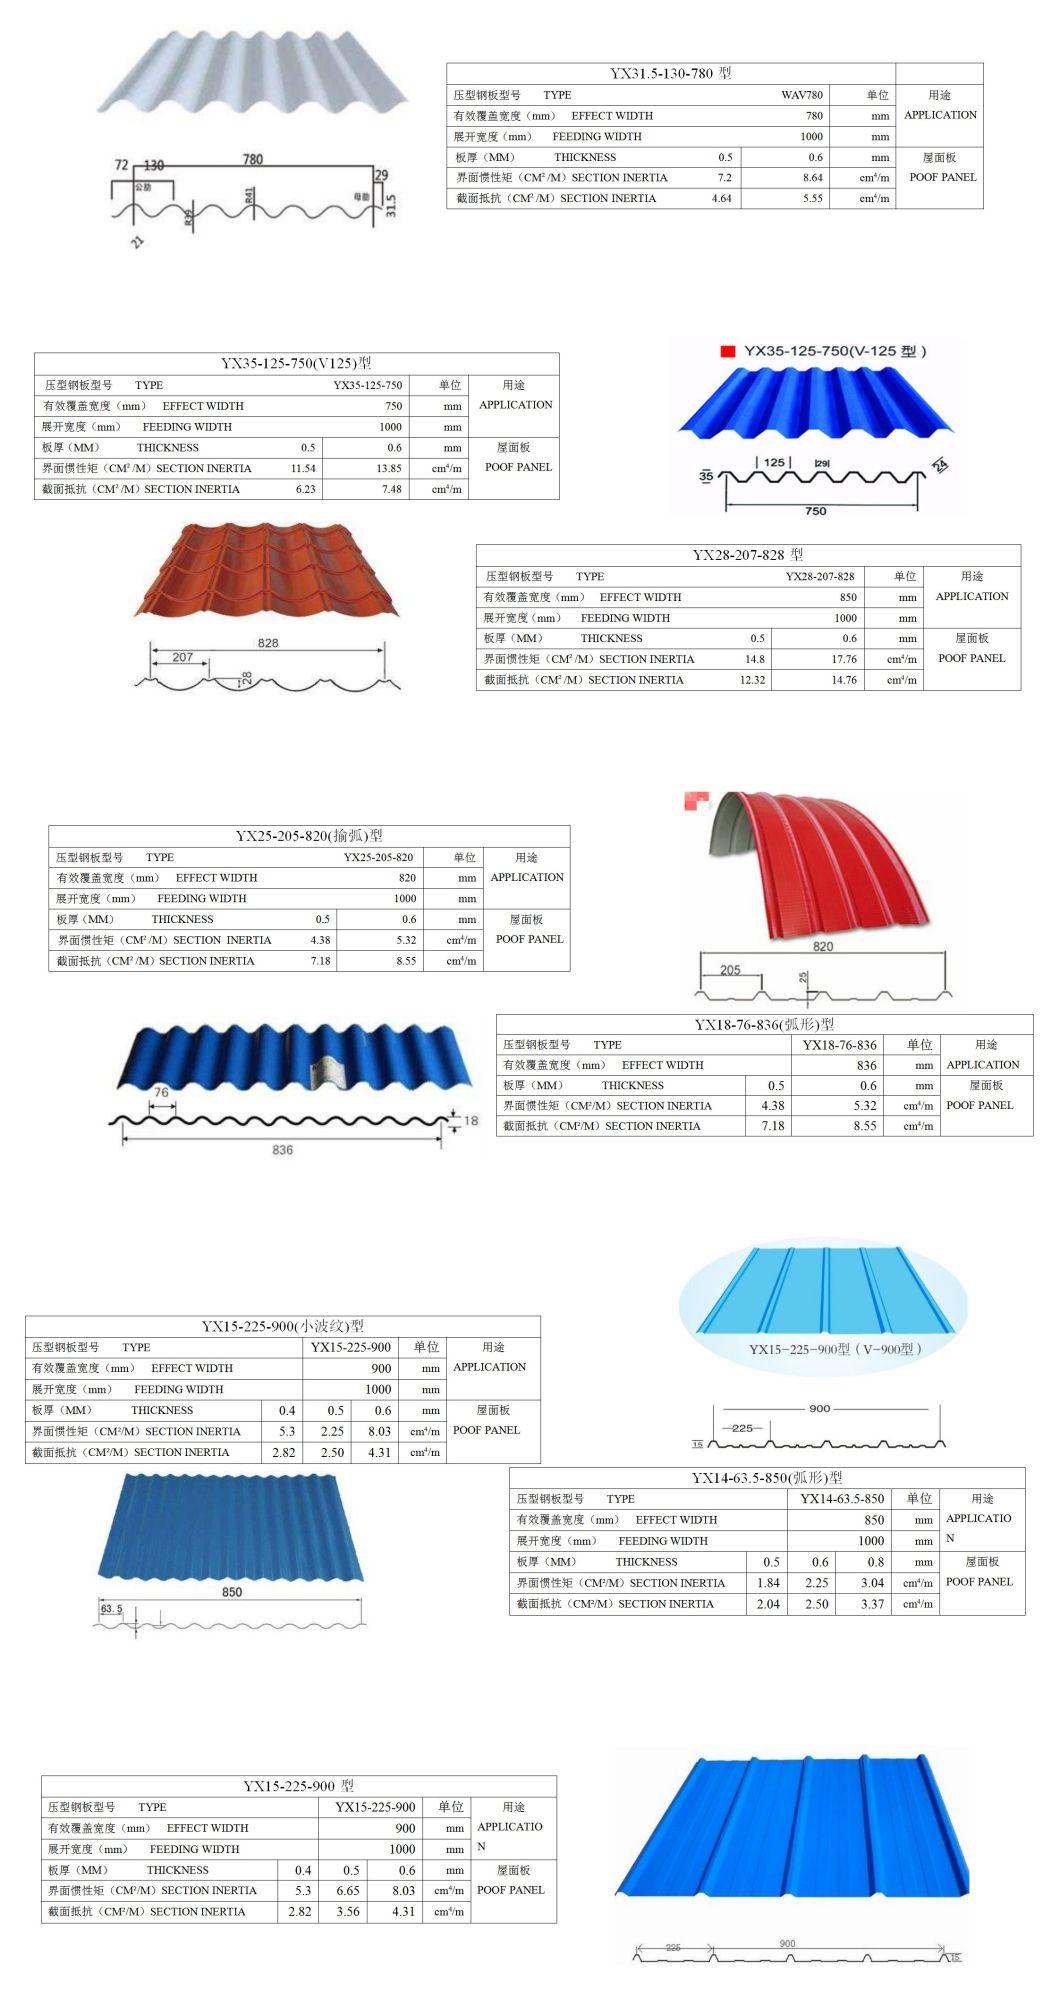 Axtd Steel Group! 0.4*800mm 0.48*1000mm 0.3*1000mm Color Coated Roofing PPGL Corrugated Sheet